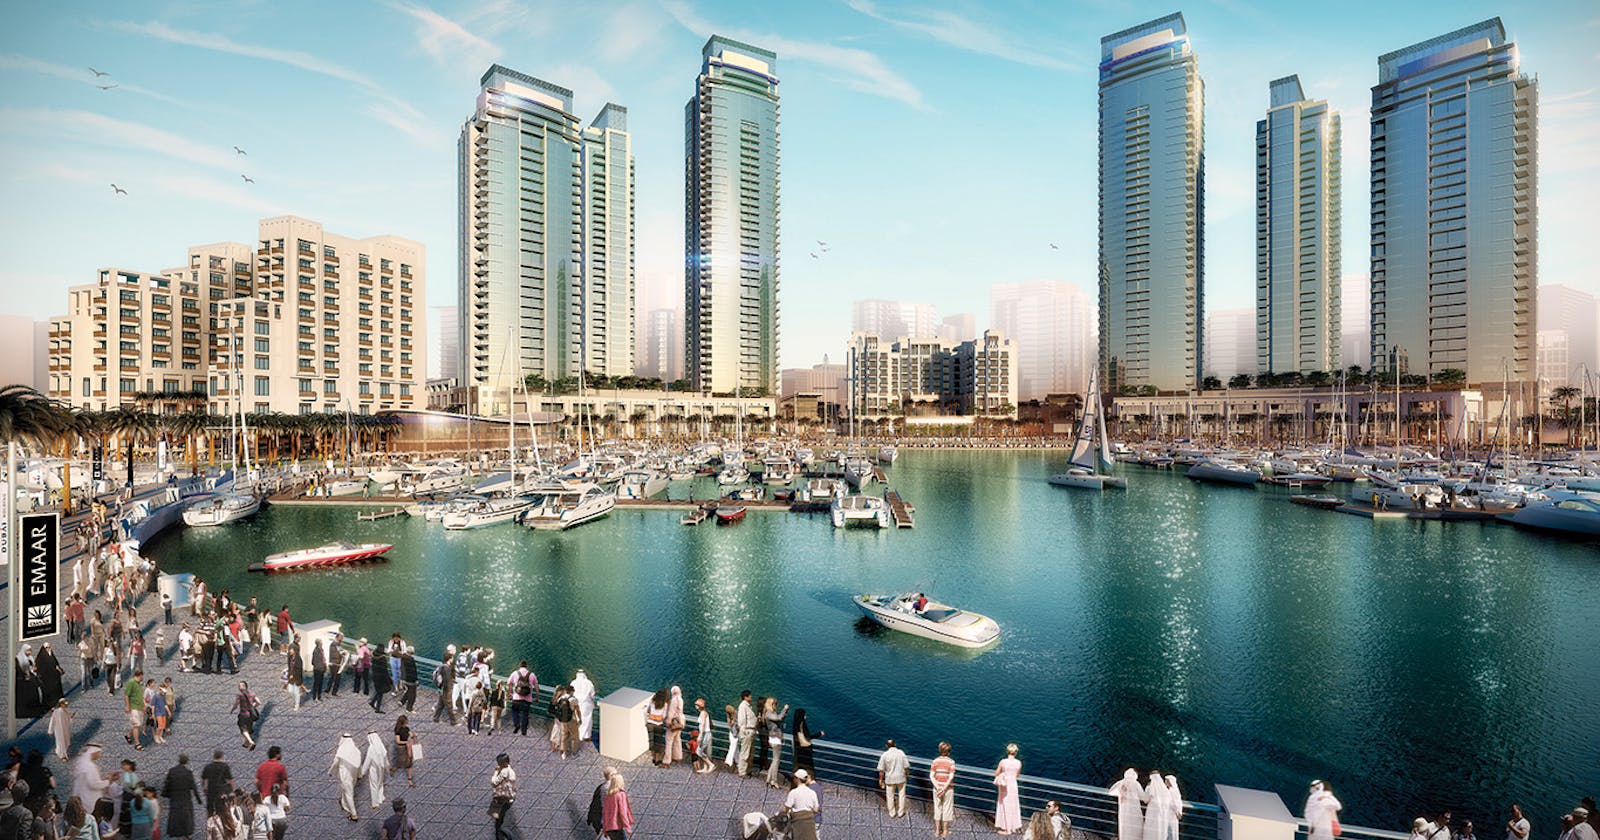 What You Should Know Before Hiring a Dubai Real Estate Broker